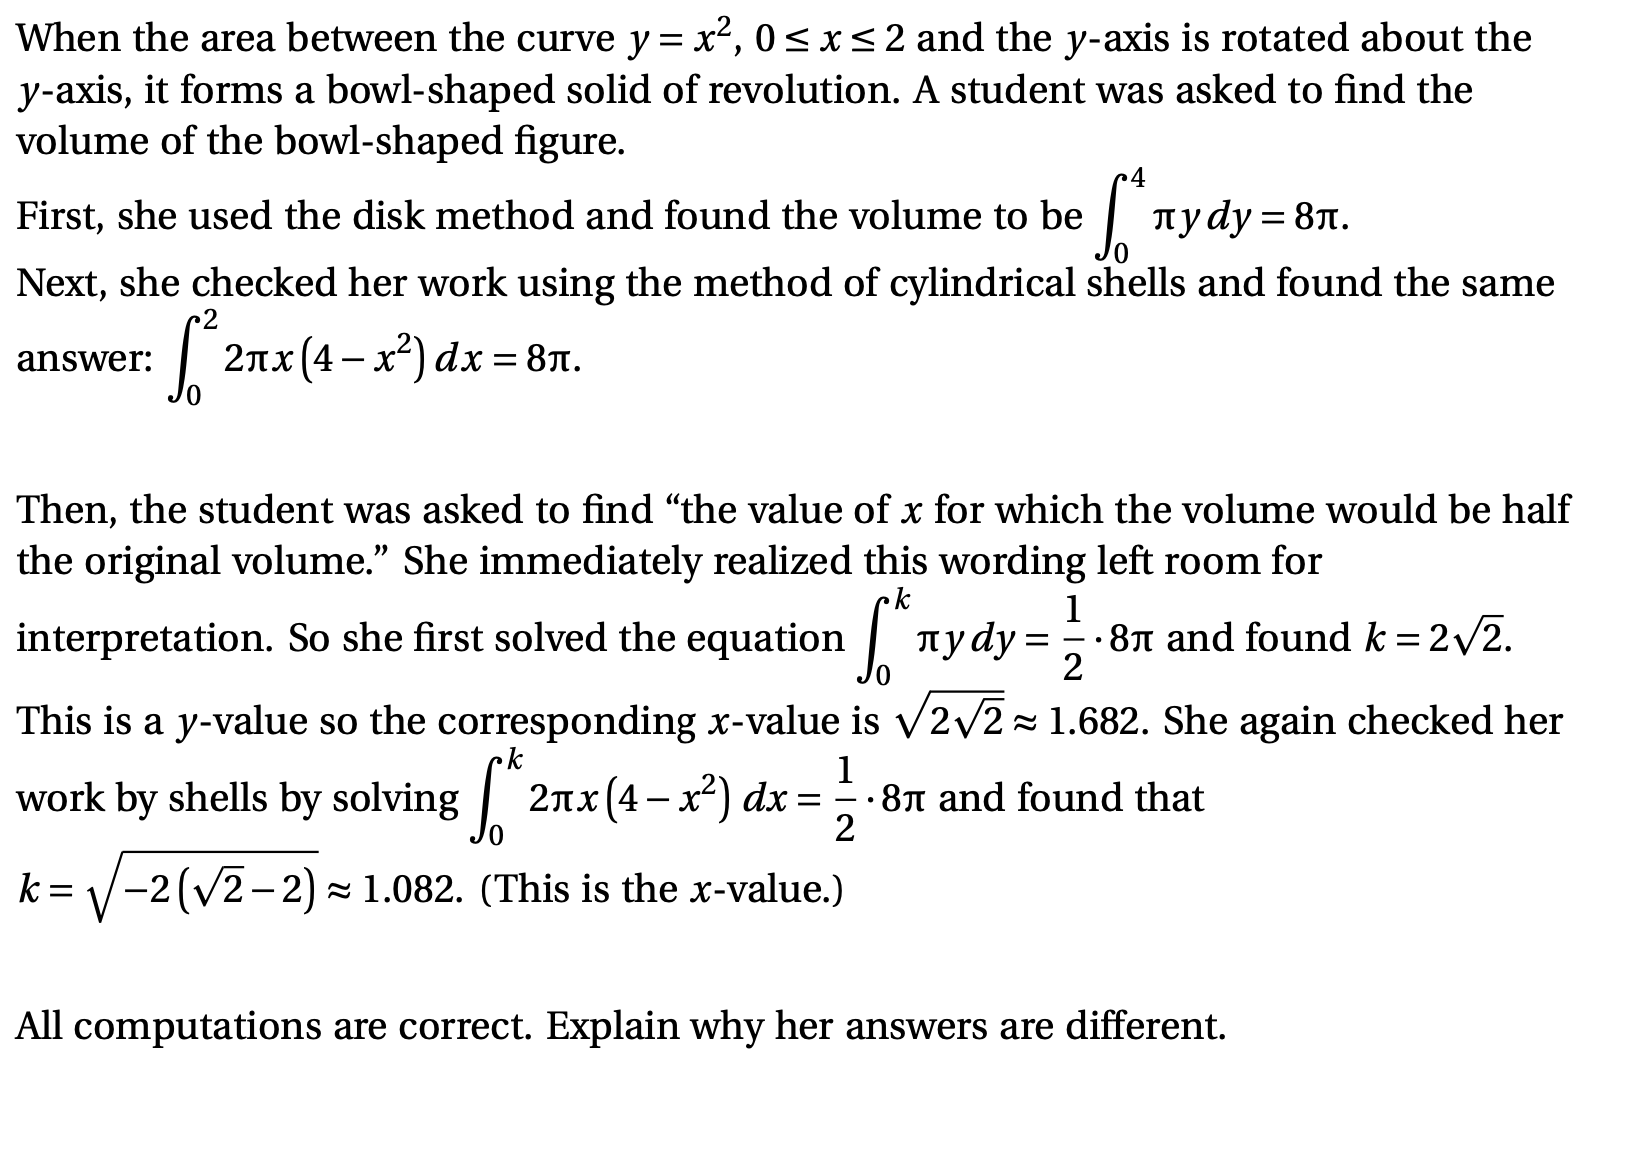 When the area between the curve y= x², 0<x<2 and the y-axis is rotated about the
y-axis, it forms a bowl-shaped solid of revolution. A student was asked to find the
volume of the bowl-shaped figure.
First, she used the disk method and found the volume to be
| nydy:
луду%3D 8л.
Next, she checked her work using the method of cylindrical shells and found the same
2лх(4 — х) dx %3D 8л.
answer:
Then, the student was asked to find “the value of x for which the volume would be half
the original volume." She immediately realized this wording left room for
ck
interpretation. So she first solved the equation | nydy:
1
= =
· 81 and found k = 2/2.
2
This is a y-value so the corresponding x-value is v2/2= 1.682. She again checked her
k
2nx(4-x²) dx = ;
1
· 81 and found that
work by shells by solving
k = V-2(v2-2) - 1.082. (This is the x-value.)
All computations are correct. Explain why her answers are different.
